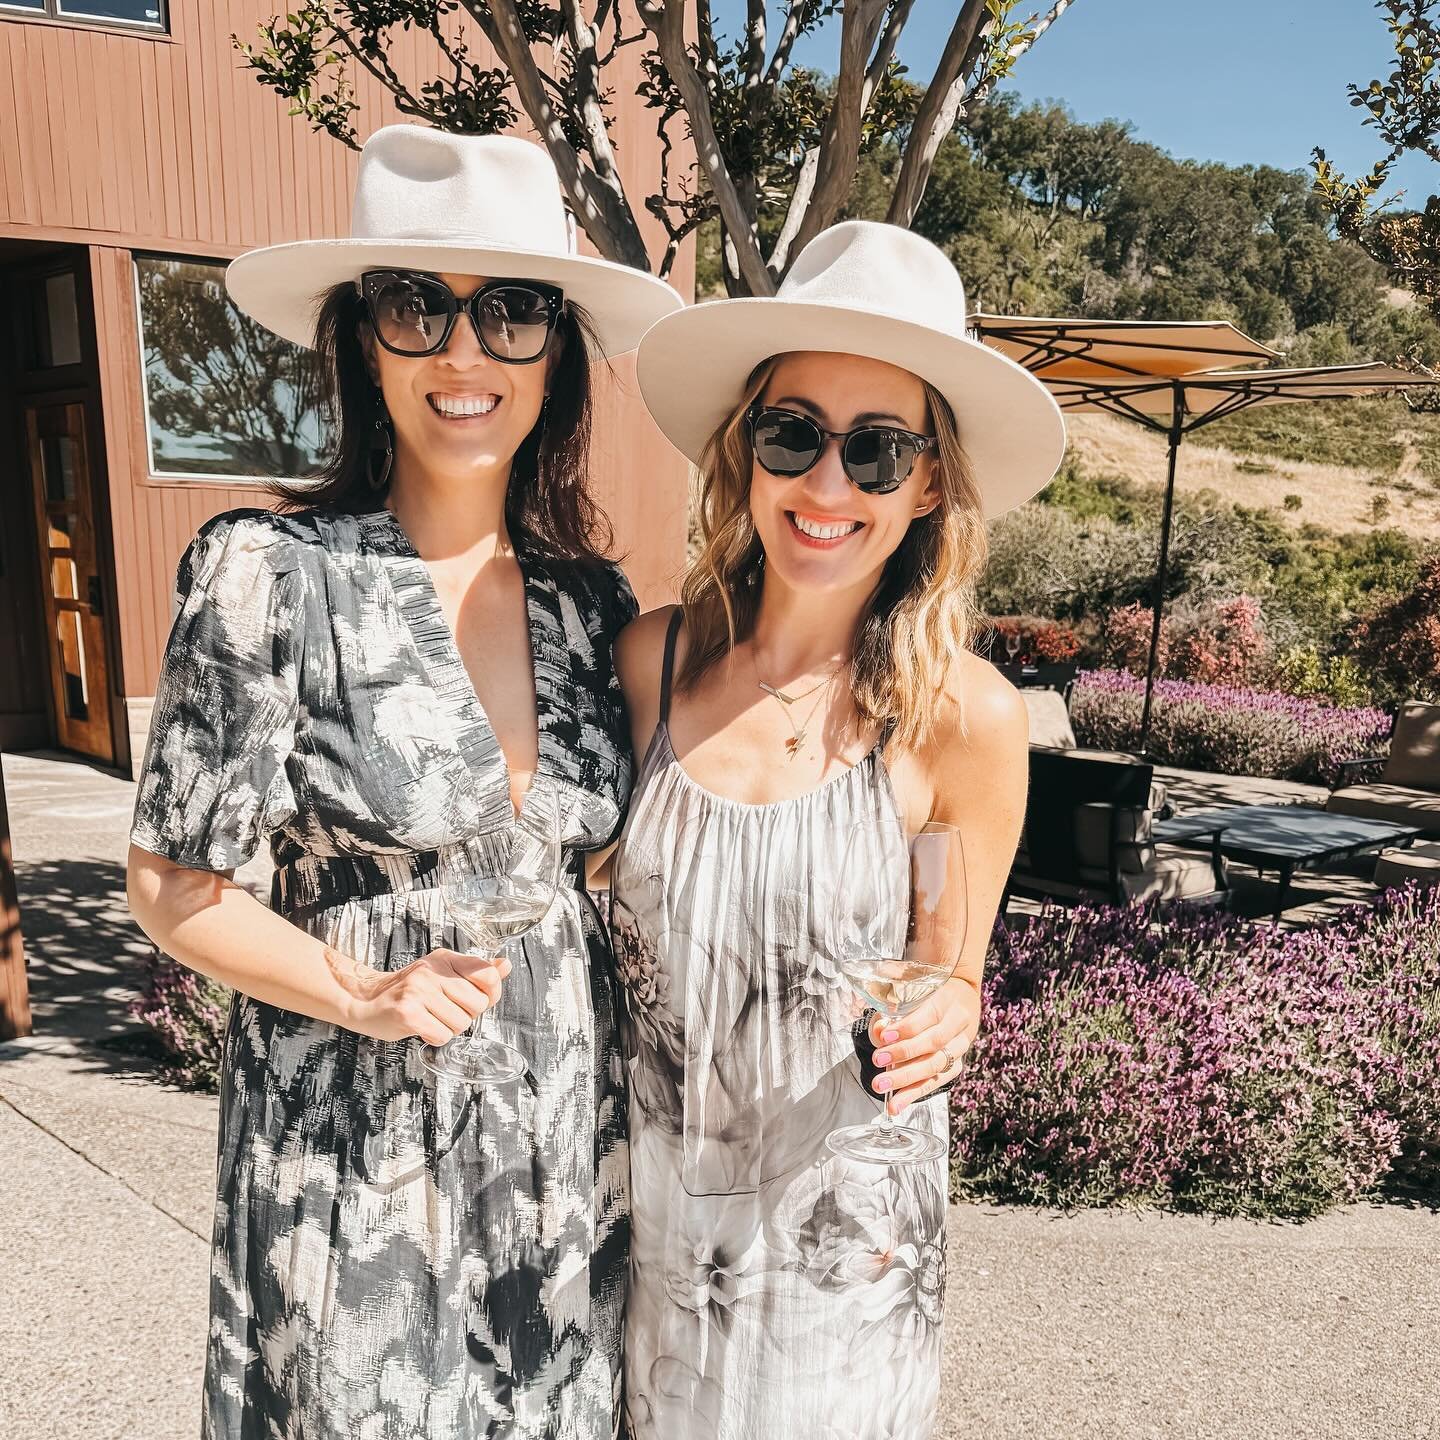 A rigorous research project was conducted today: findings found a correlation between wearing a Brimroad hat, wine tasting and a good time ☀️ #brimroad #brimroadhats #handmadehats #customhats #Shoplocal #hatter #haymaker